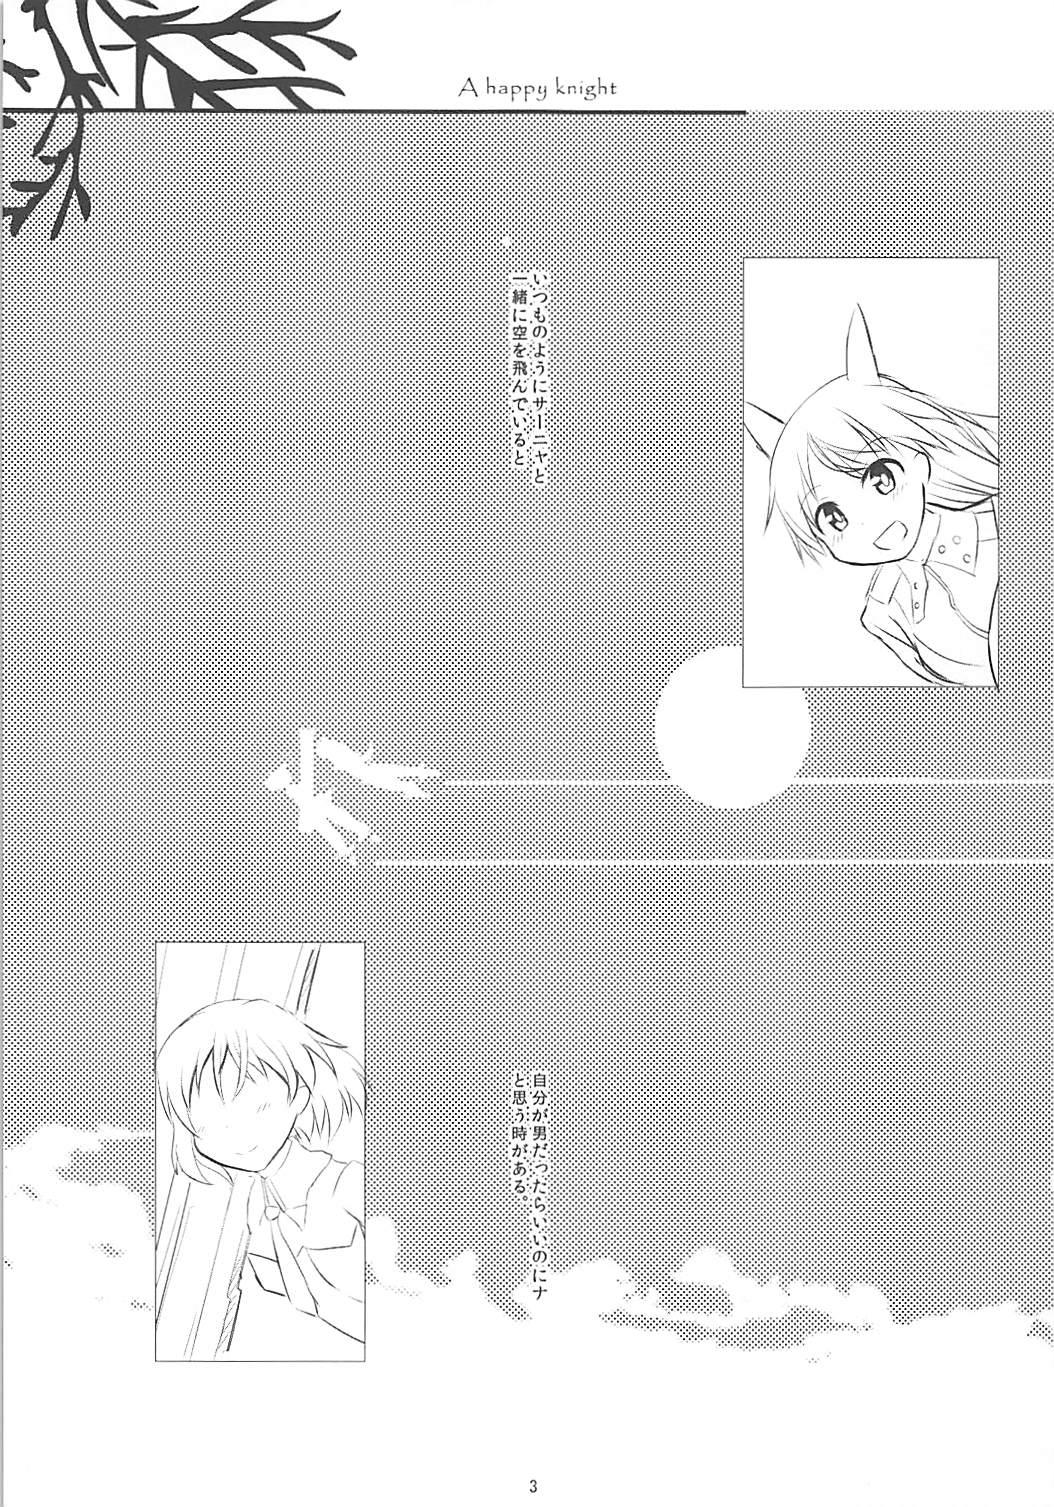 Perverted A happy knight - Strike witches Exgf - Page 2